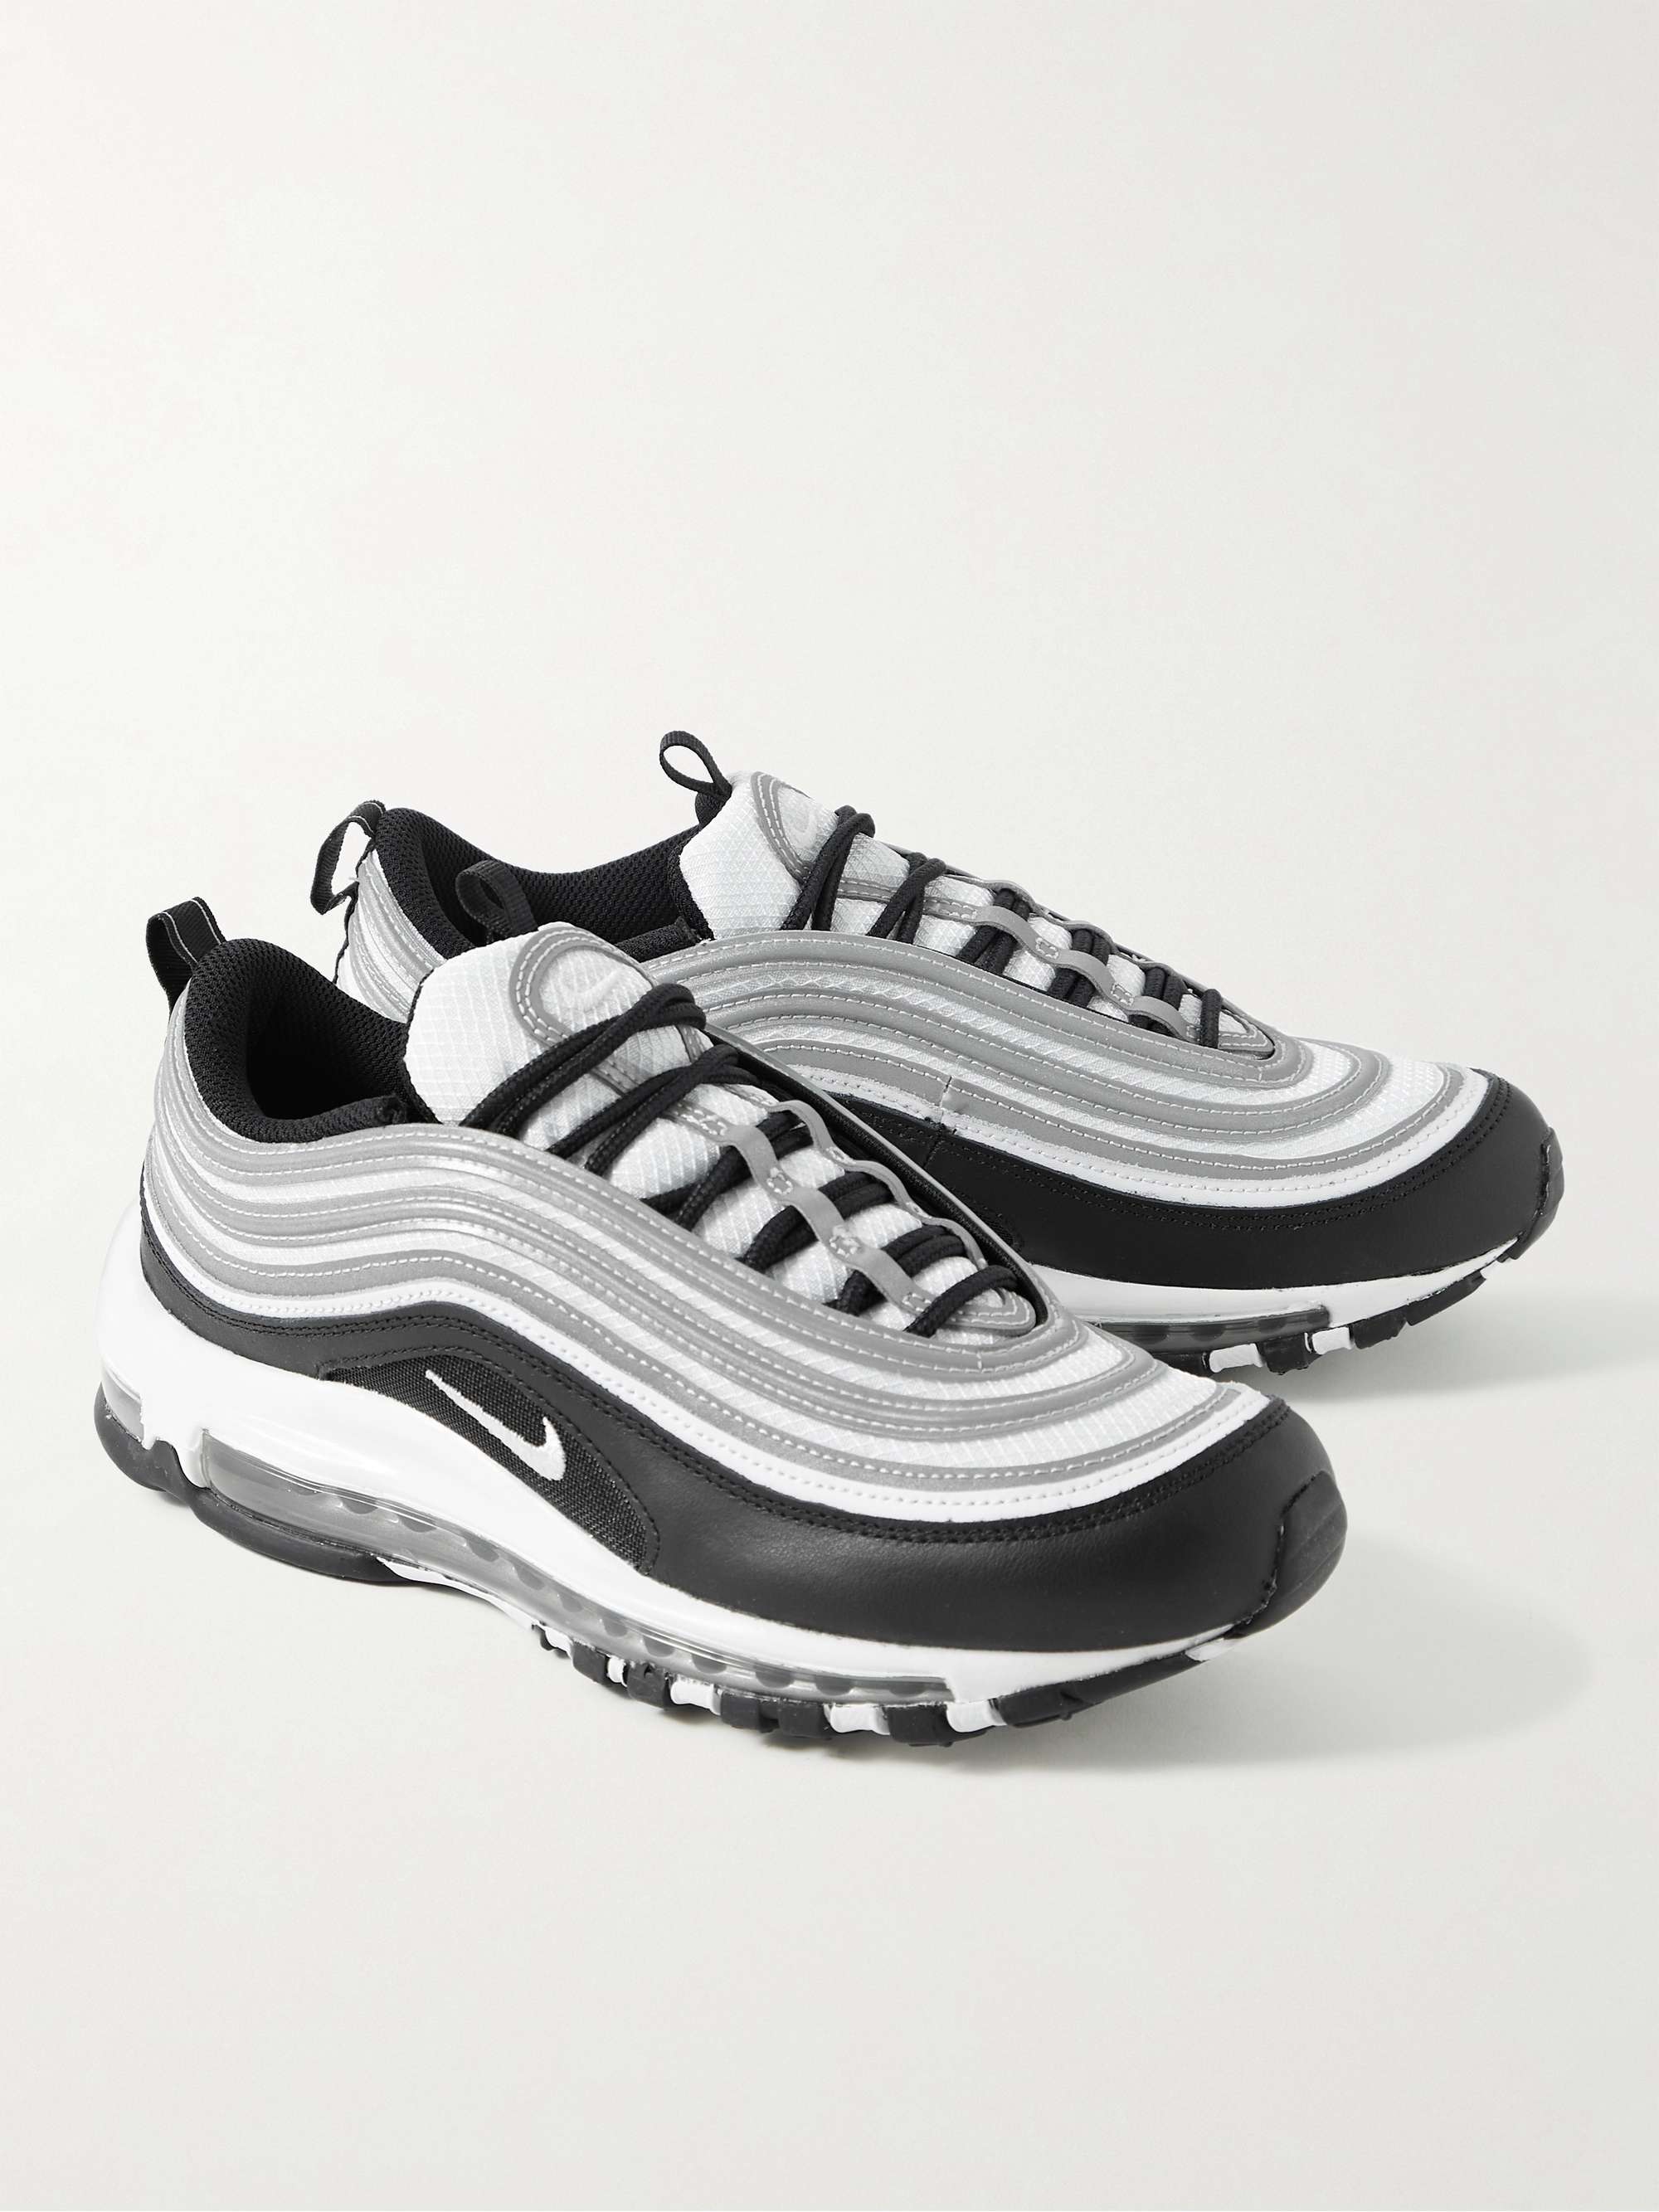 Black Air Max 97 Leather and Mesh Sneakers | NIKE | MR PORTER